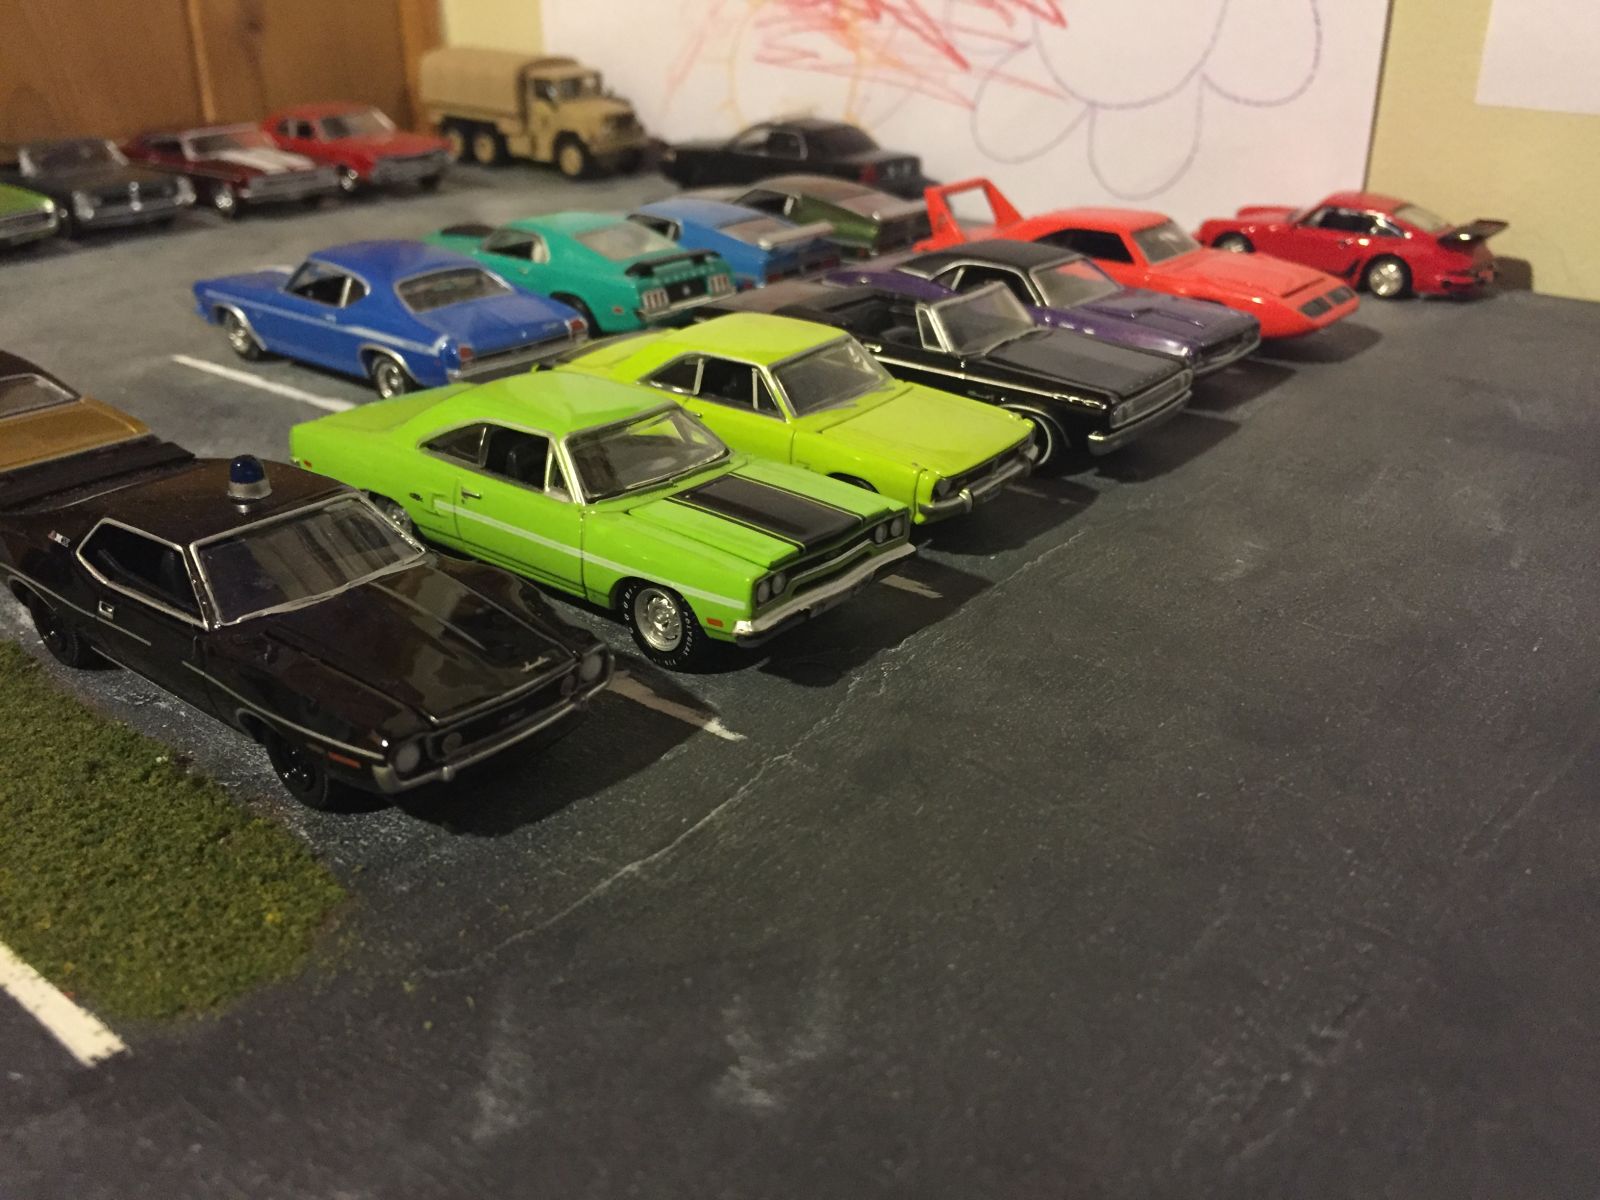 I love the variety of Mopar colors, :).